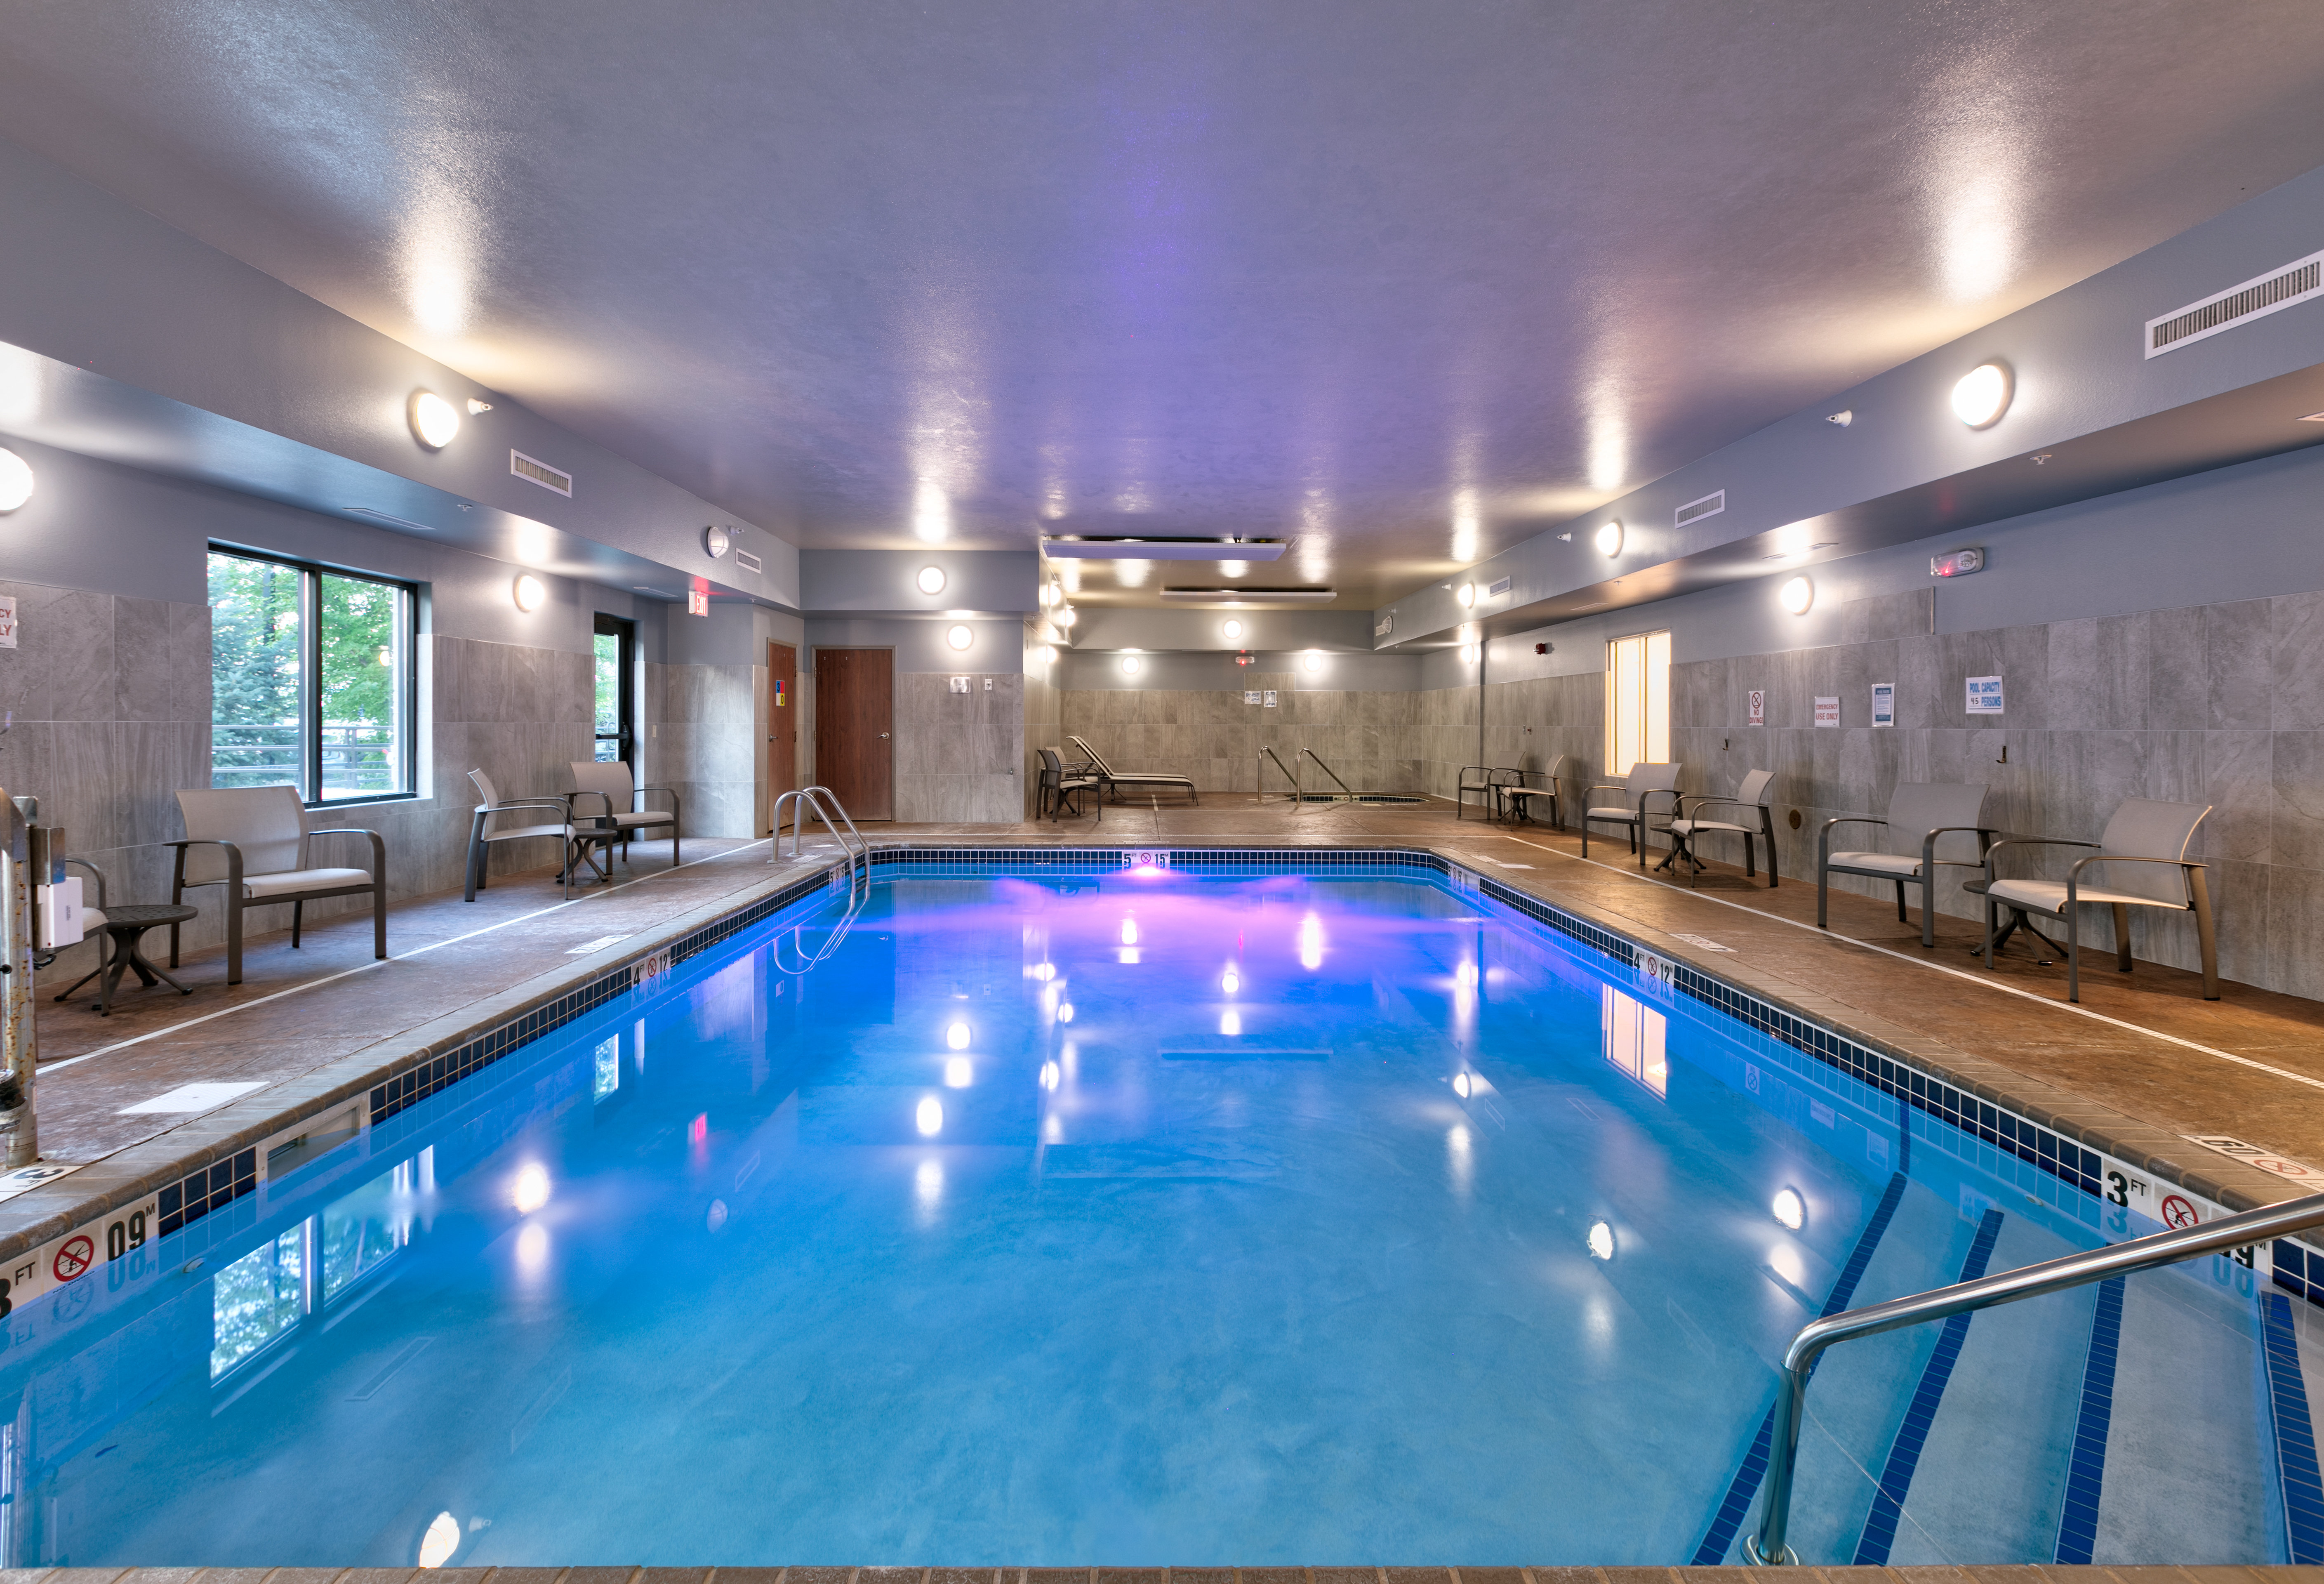 Kick back and relax in our swimming pool and whirlpool.